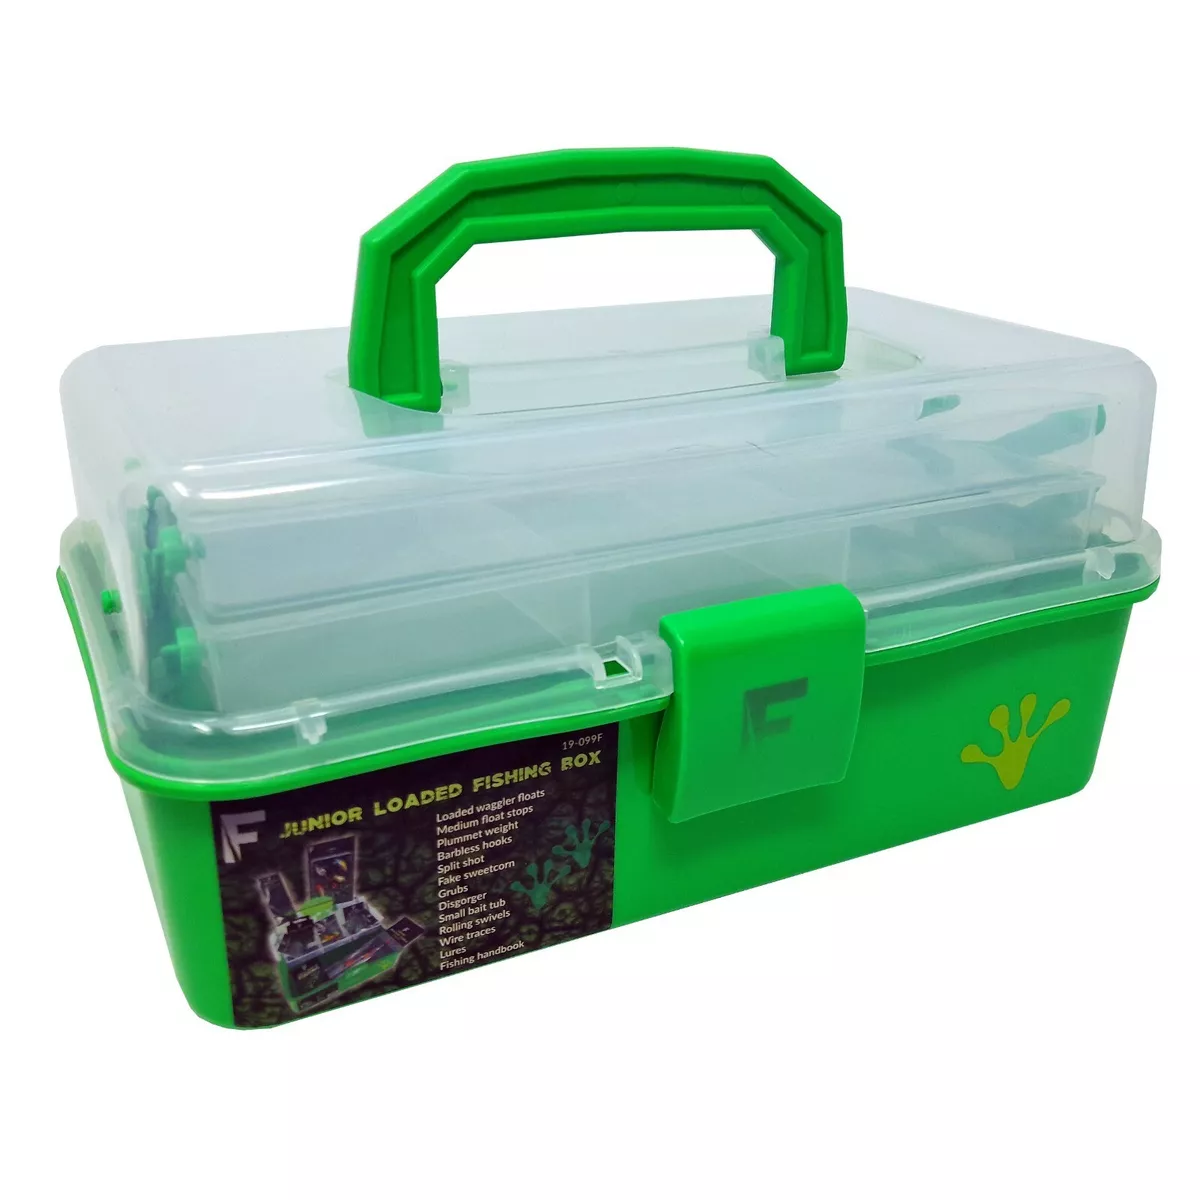 Fladen Green Fishing Tackle box with Tackle Floats Shot Spinners